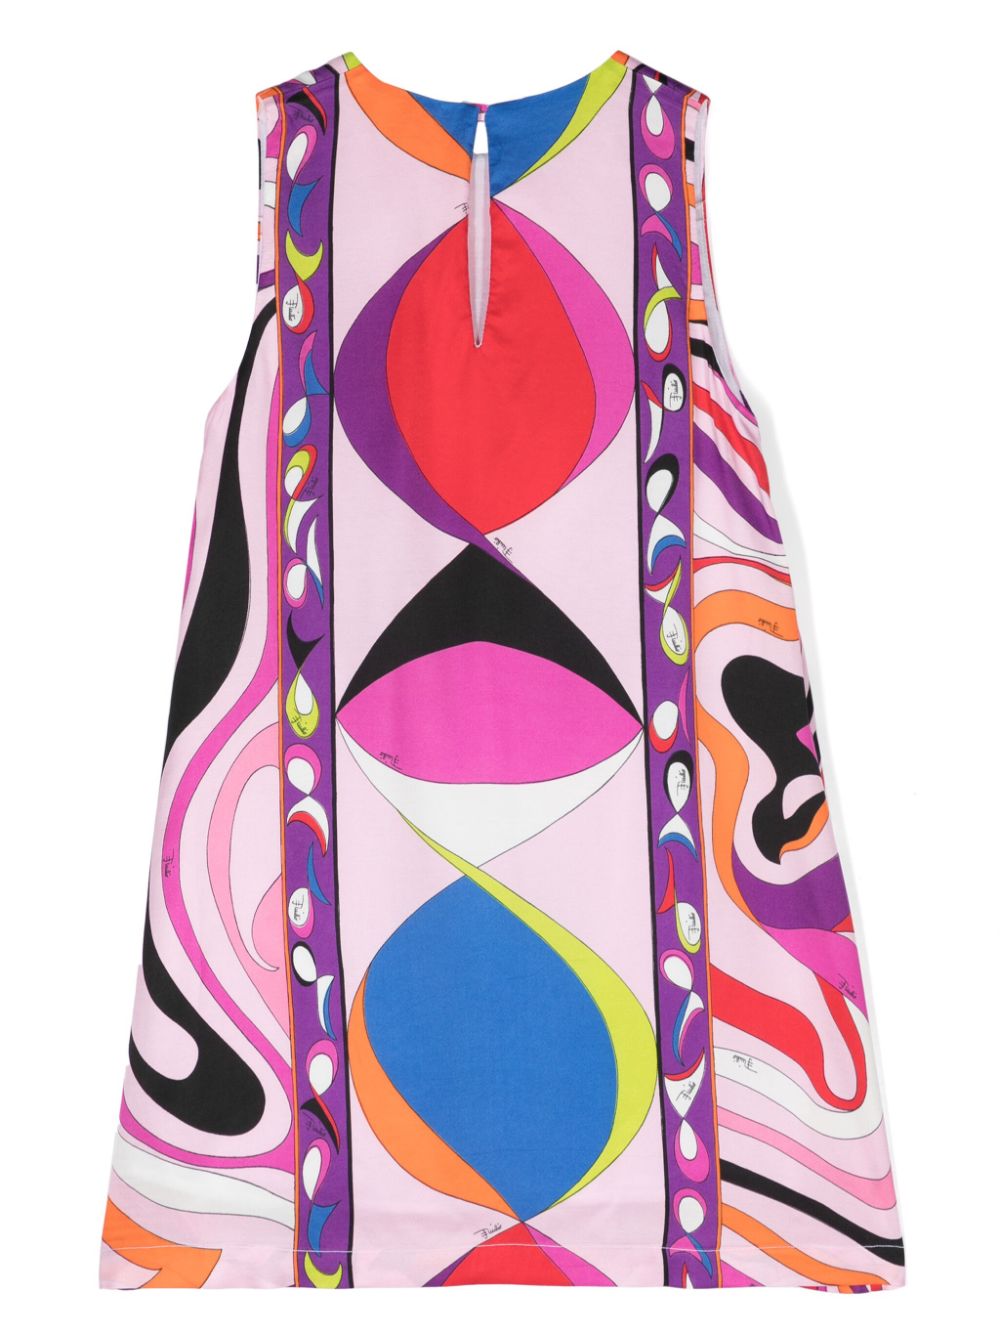 Multicolored dress for girls with print